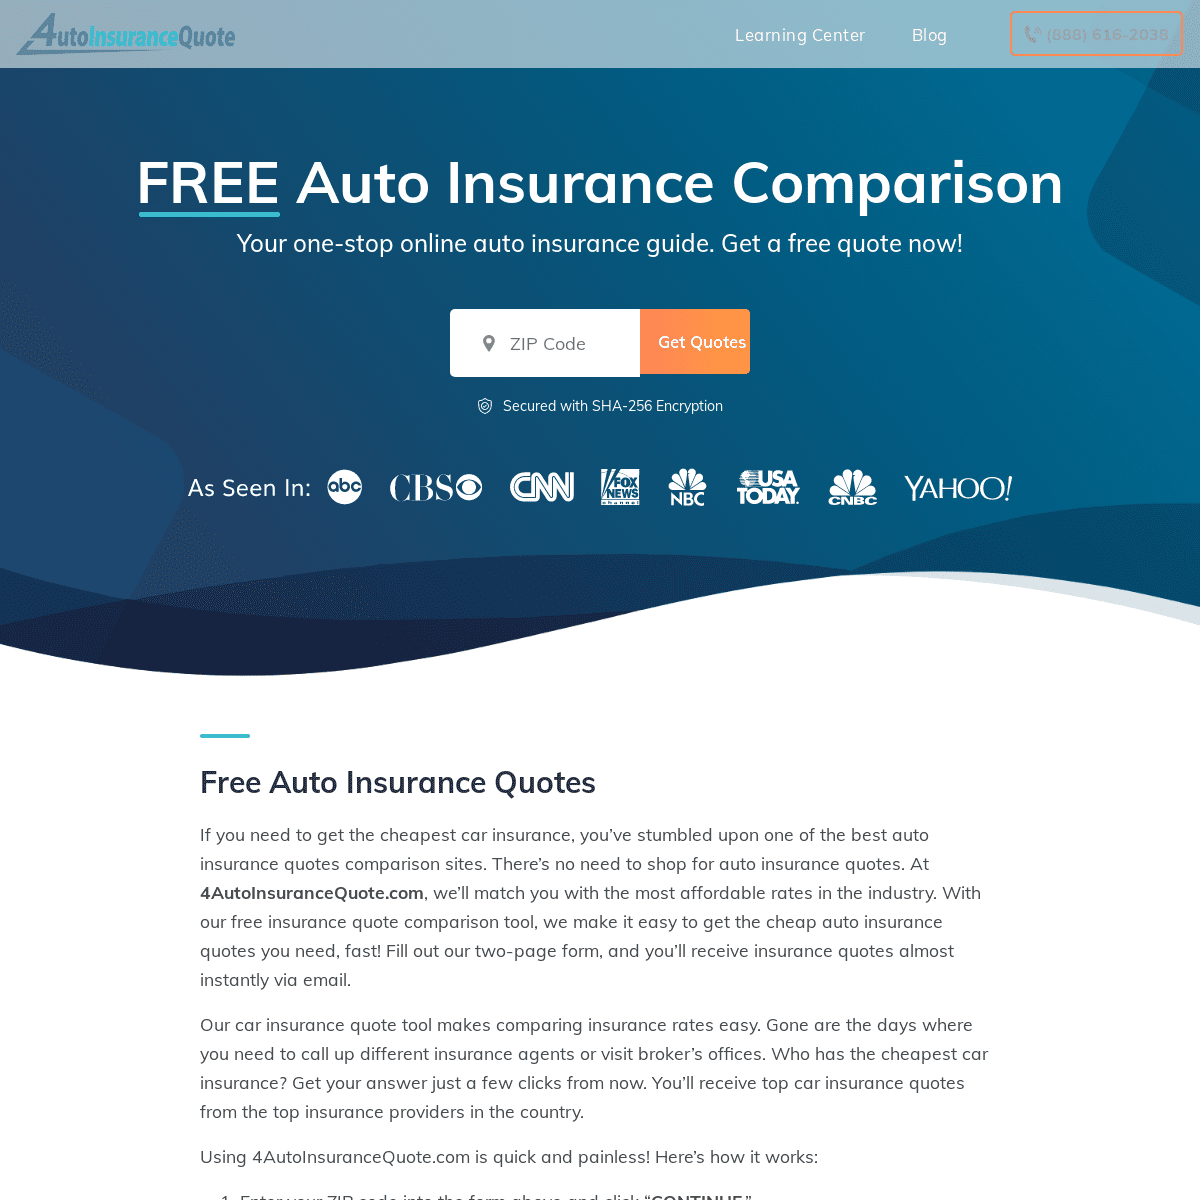 A complete backup of https://4autoinsurancequote.com